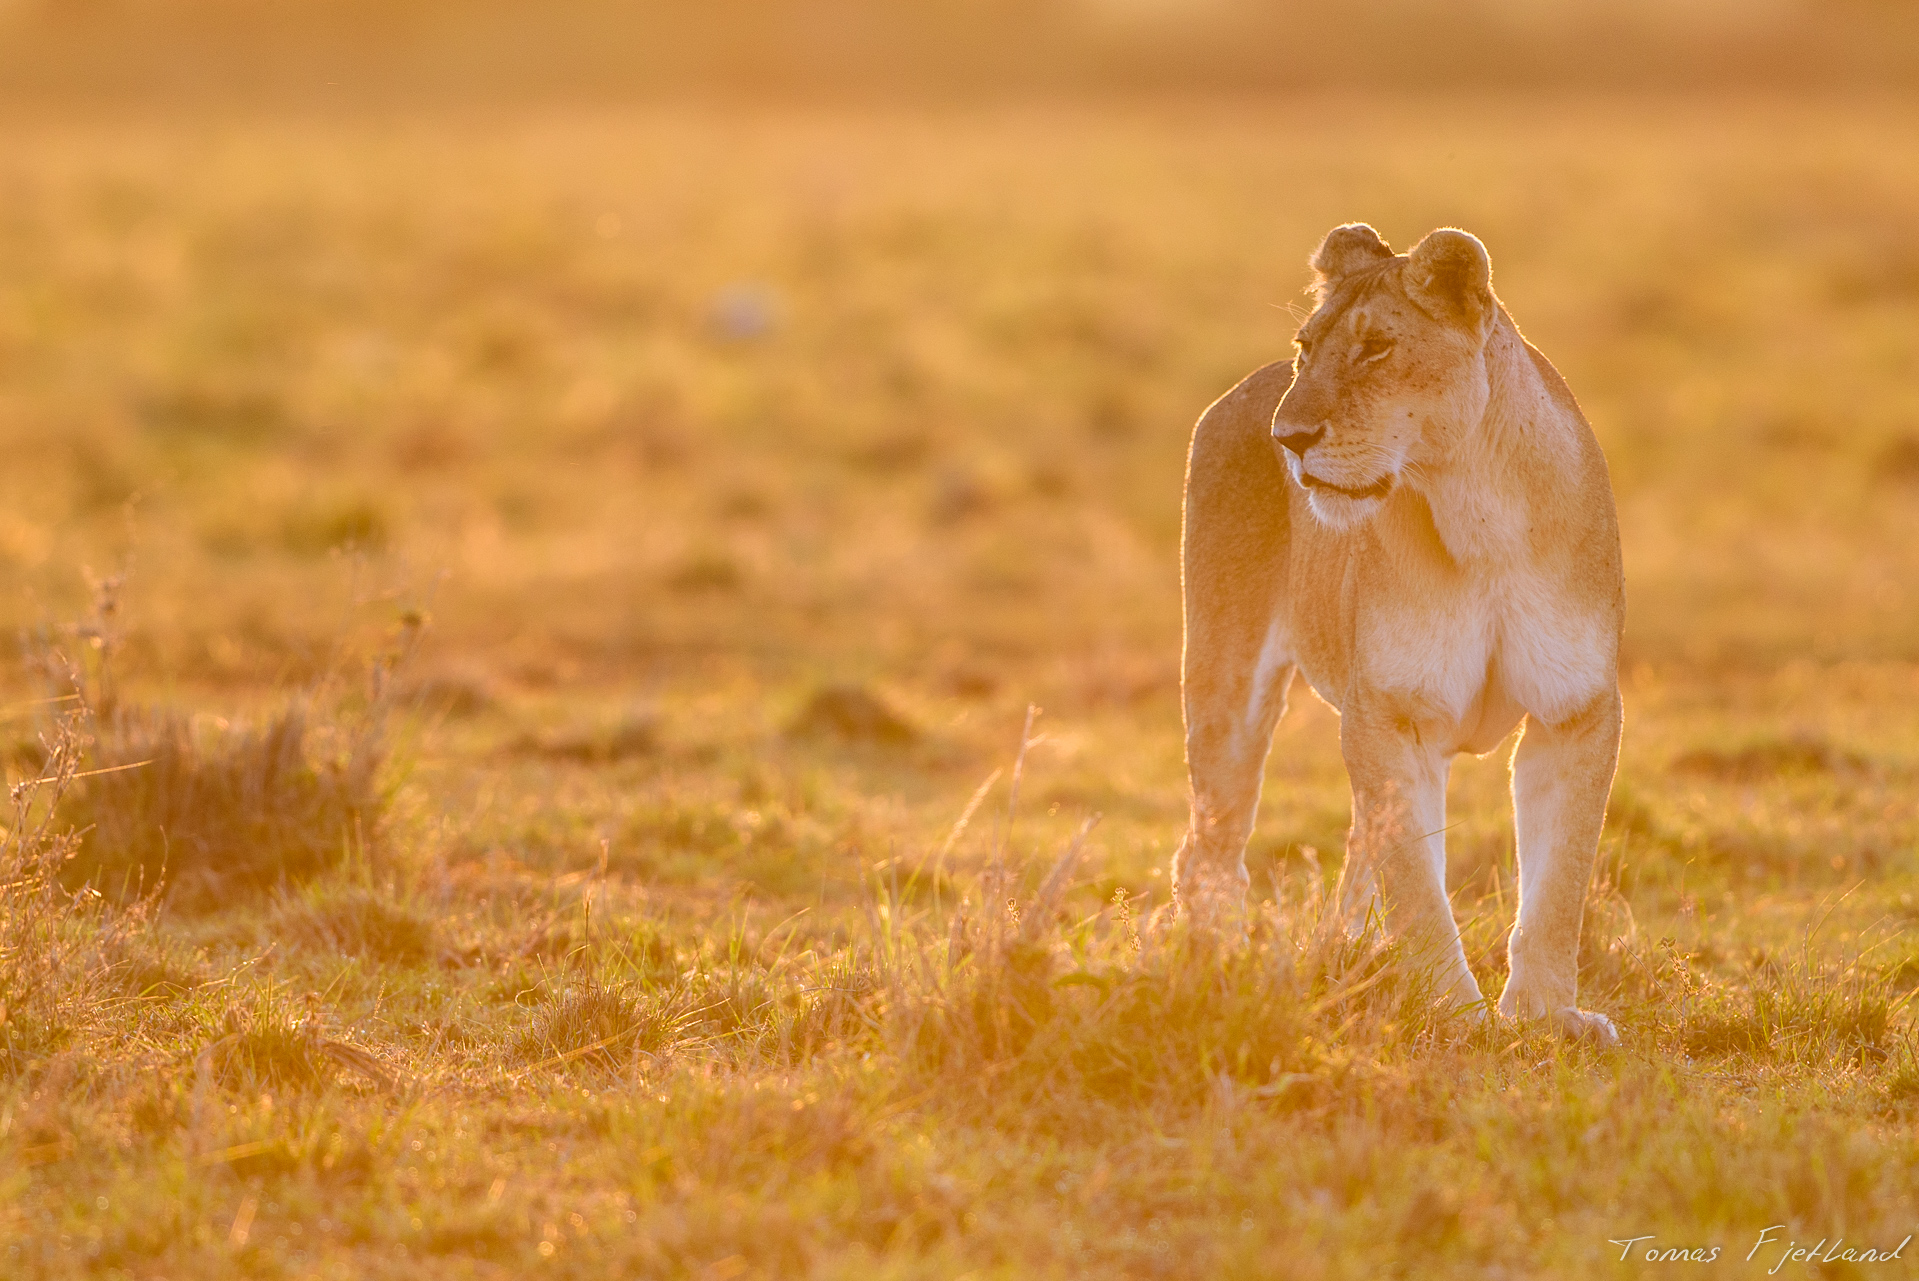 Lioness bathed in the warm morning light